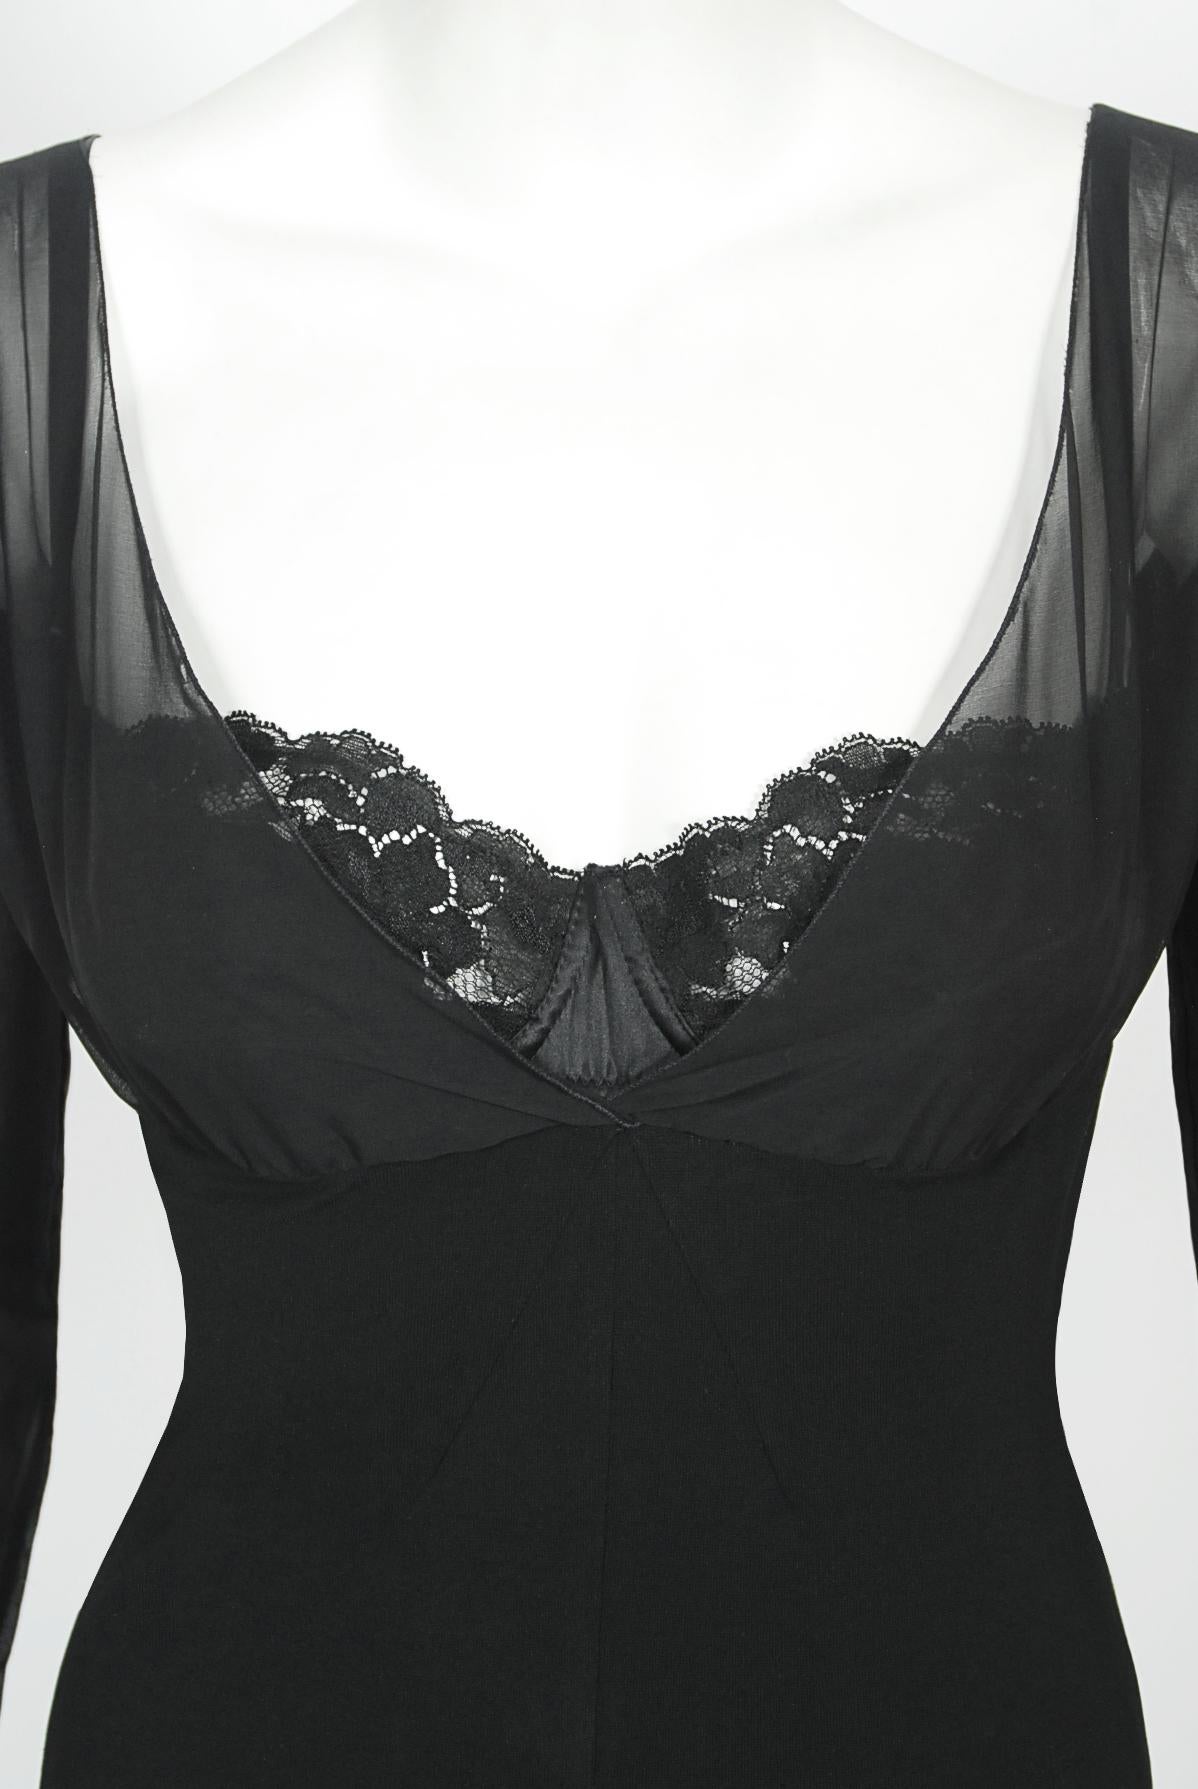 Vintage 2001 Dolce & Gabbana Sheer Black Silk Built-In Bra Plunge Hourglass Gown In Good Condition For Sale In Beverly Hills, CA